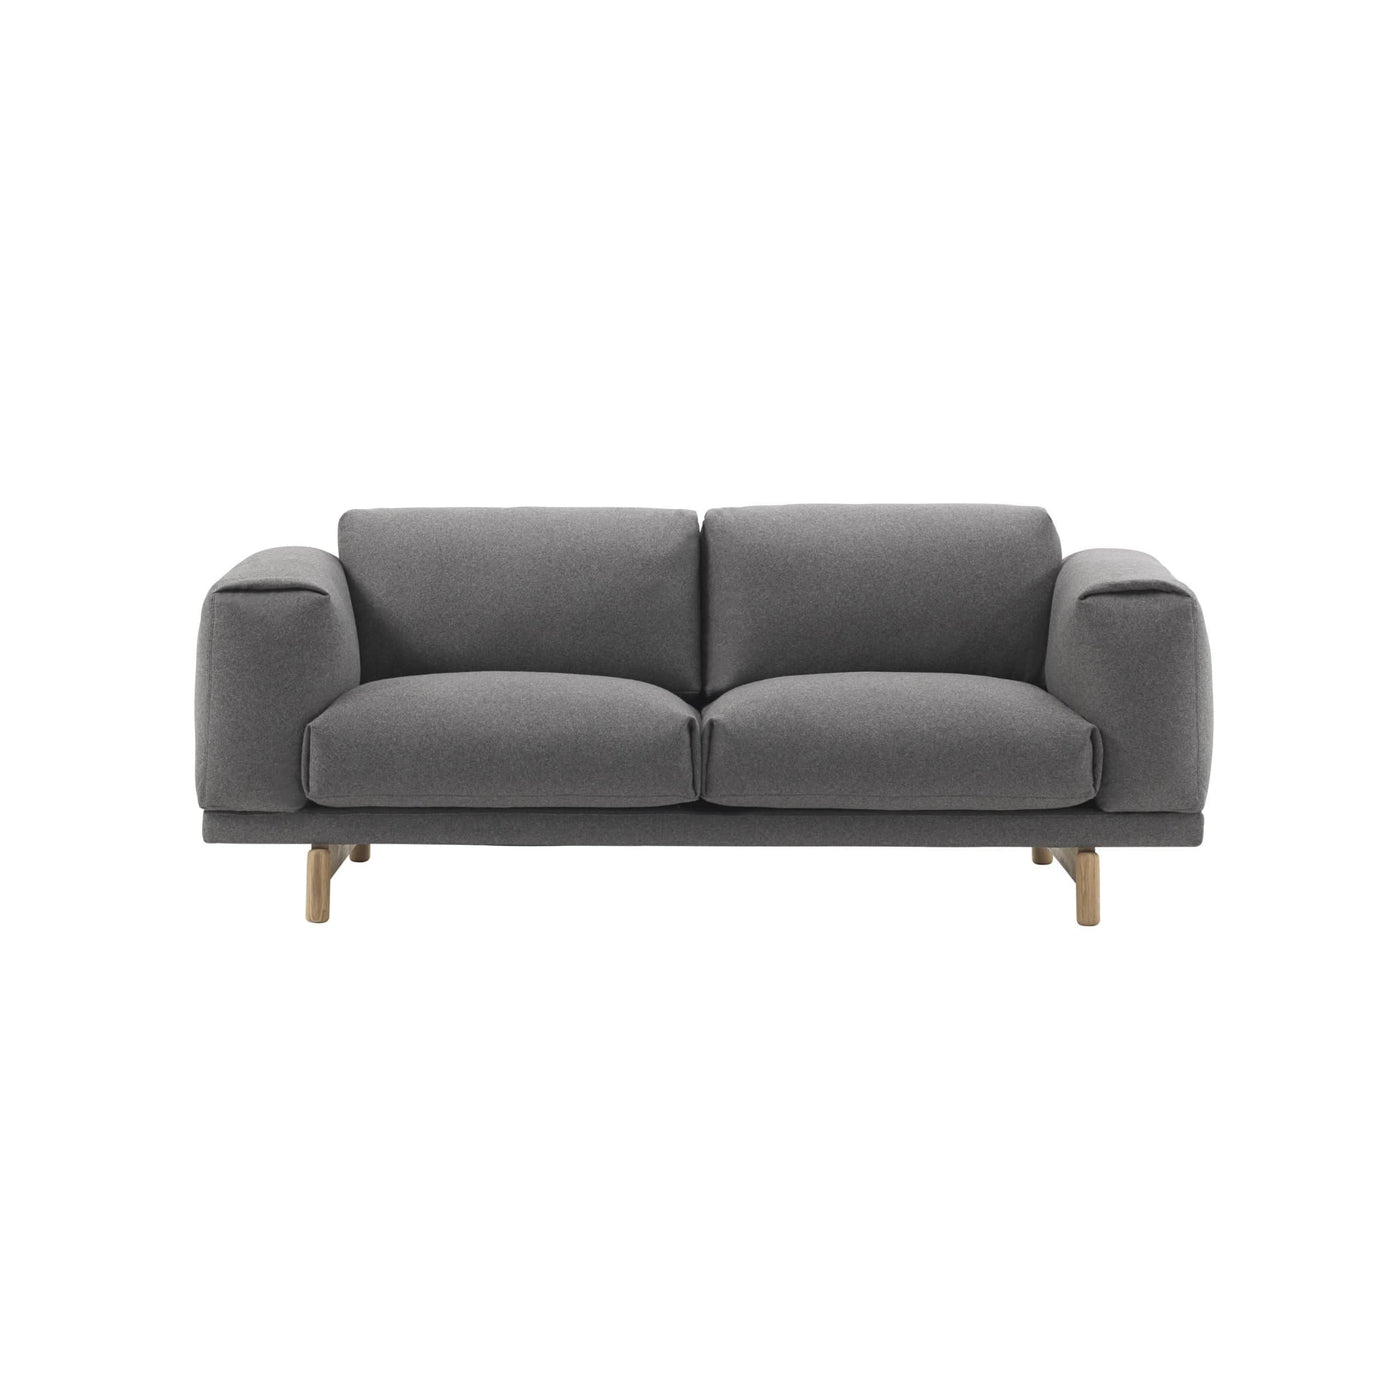 Muuto Rest 2 Seater Sofa in Wooly 1042 grey fabric. Made to order from someday designs. #colour_wooly-1042-grey